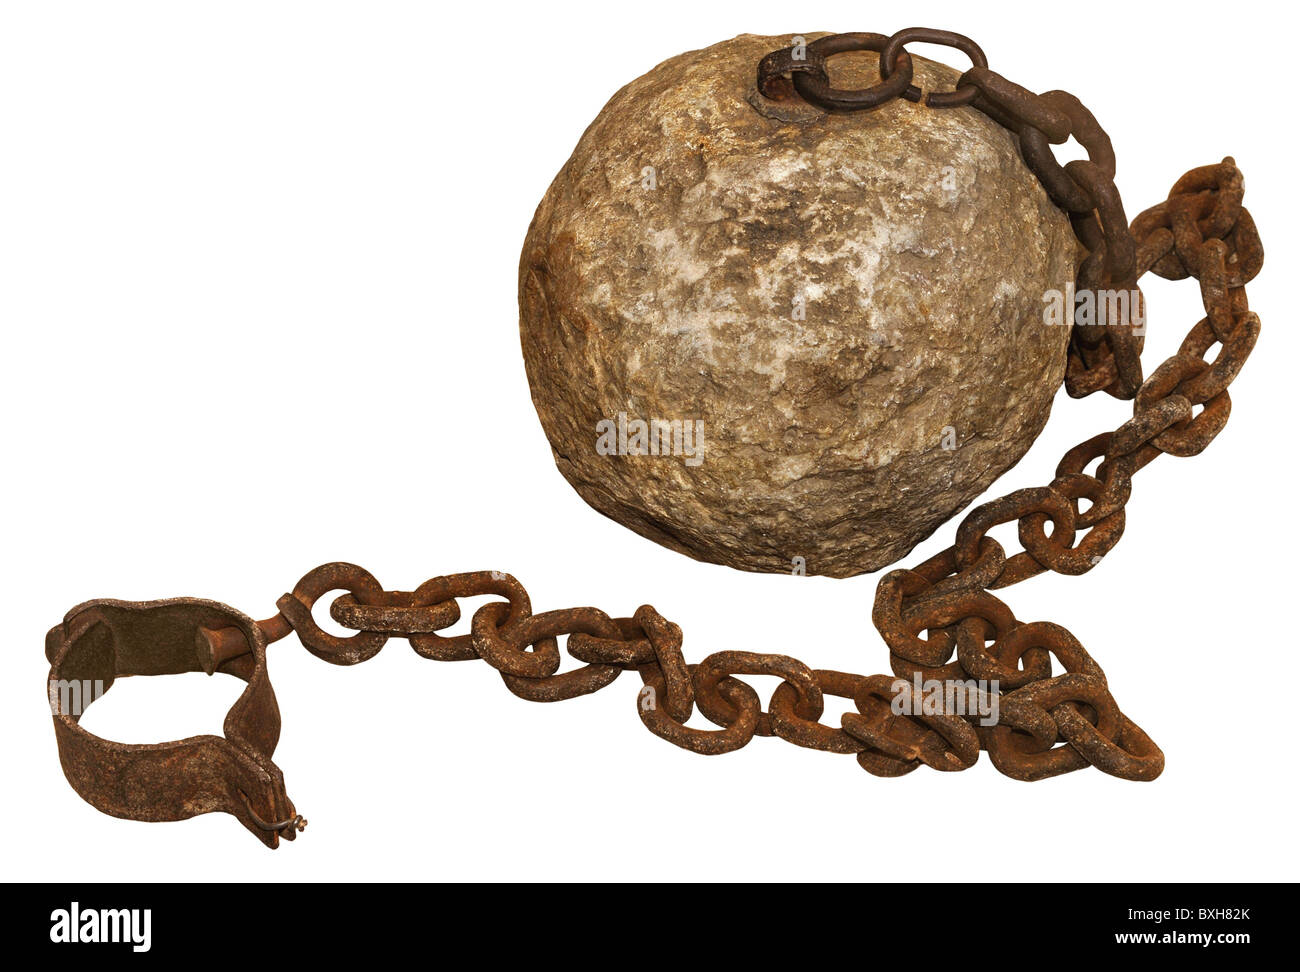 justice, penitentiary system, prison, fetter, stone bowl, iron manacle, Spain, circa 1800, Additional-Rights-Clearences-Not Available Stock Photo